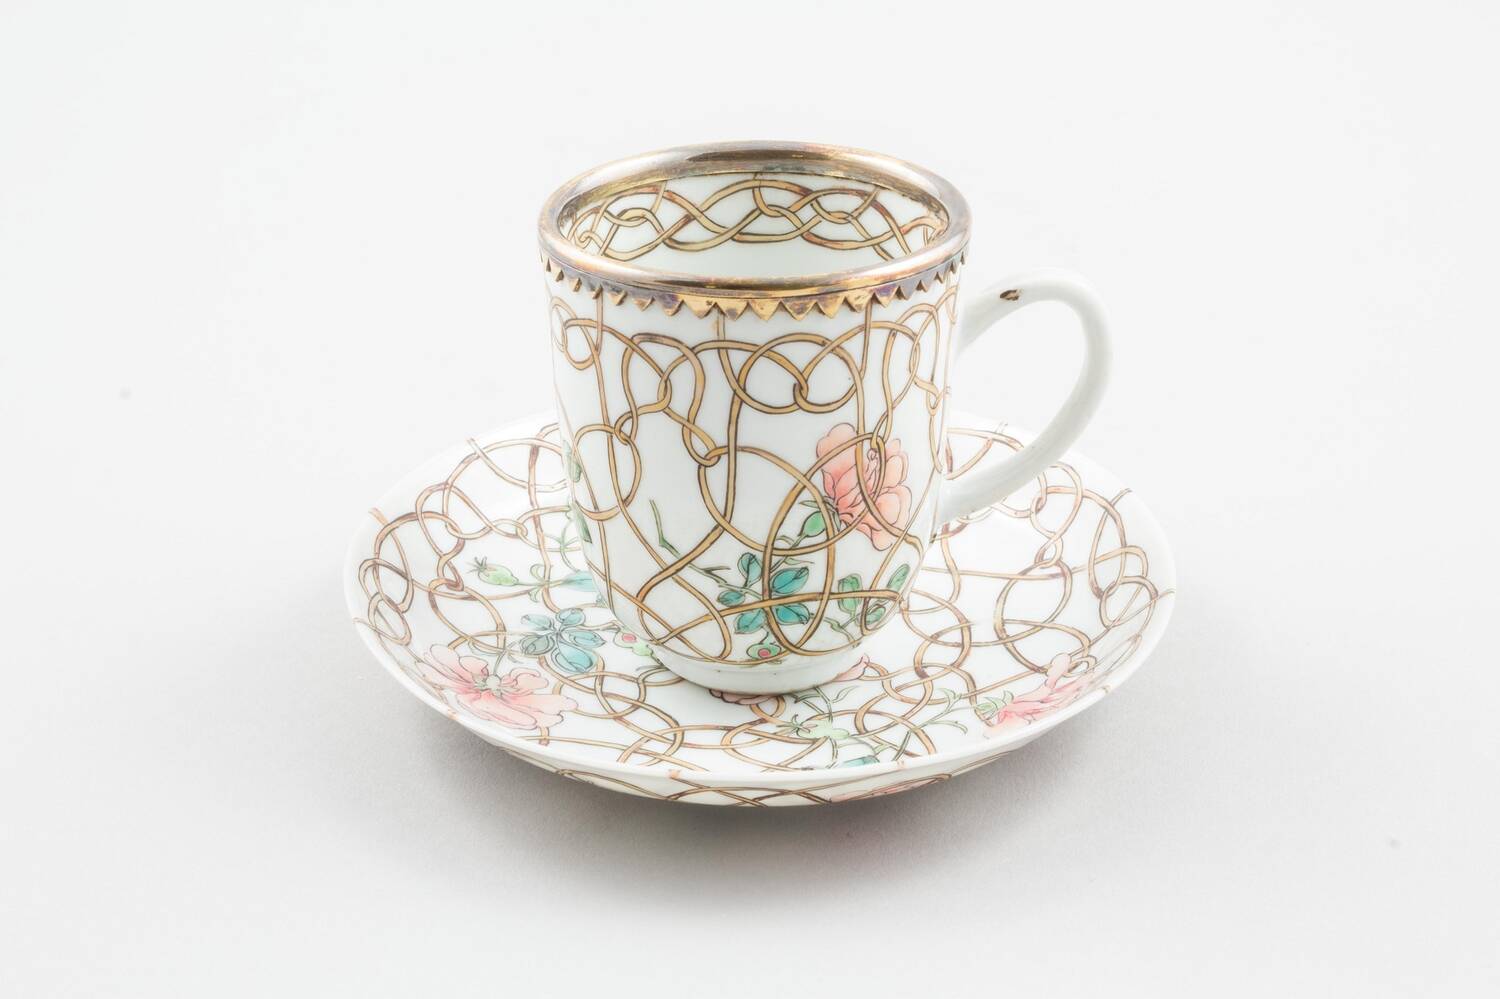 A tea cup sitting on a matching saucer is displayed against a plain grey background. It has a silver-gilt mount and is decorated with pink flowers and gold tendrils. 